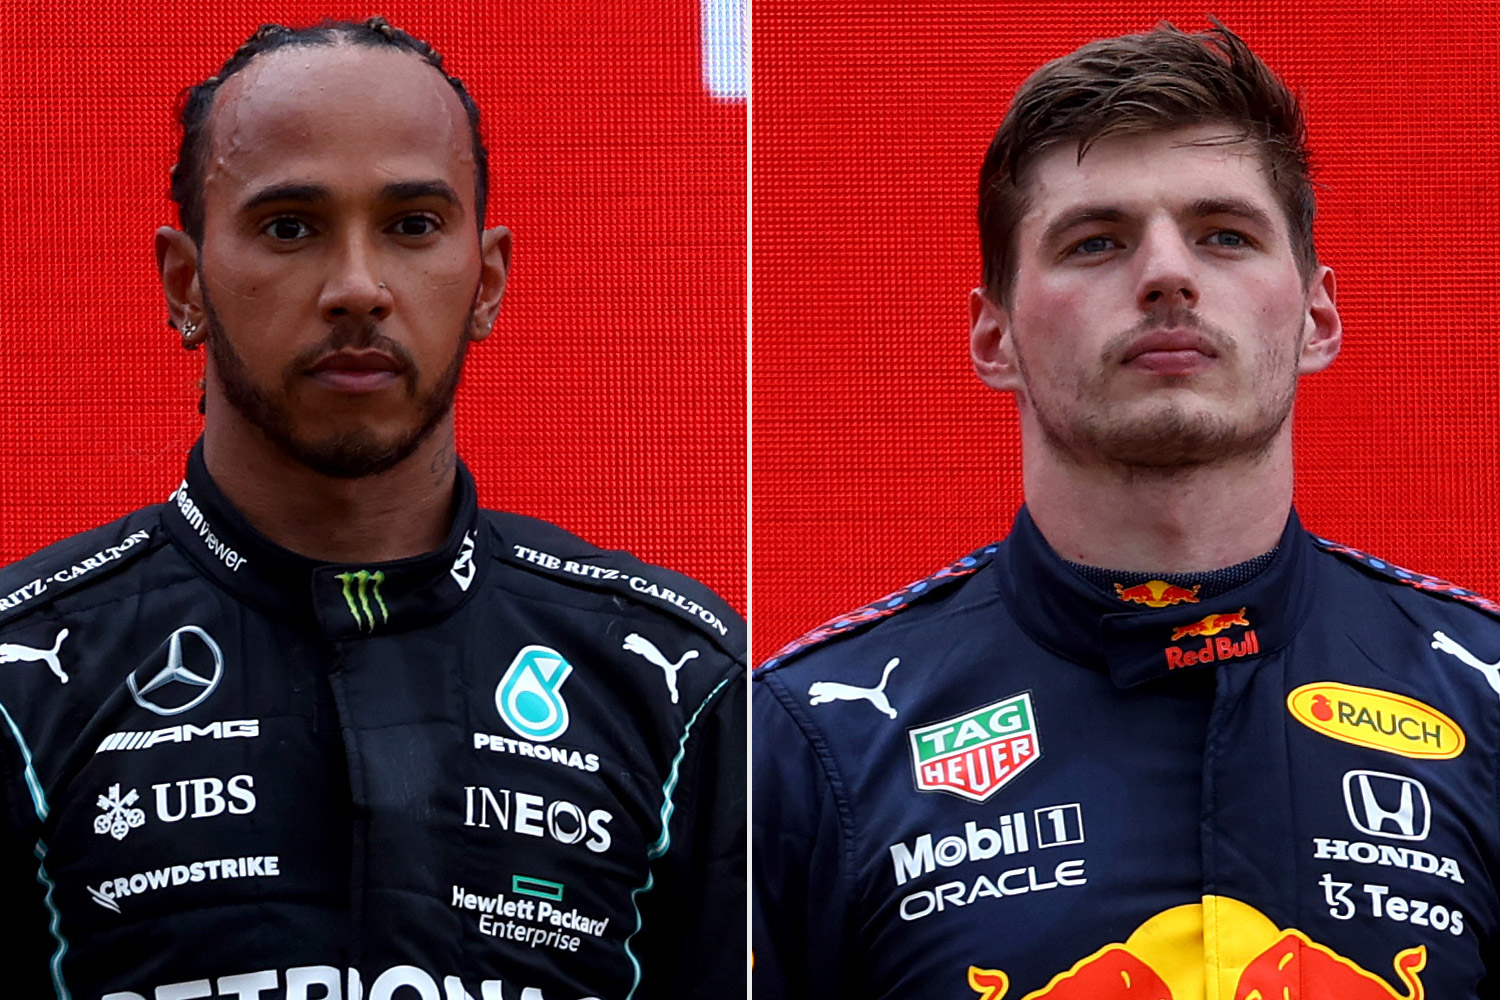 Inspiredlovers Lewis-Hamilton-max-Verstappen SkySports Commentator Martin Brundle Changes His Tune While Giving Surprise Verdict on Max Verstappen’s Controversial 2021 Title Boxing Sports  Red Bull F1 Mercedes F1 Max Verstappen Lewis Hamilton Formula 1 F1 News 